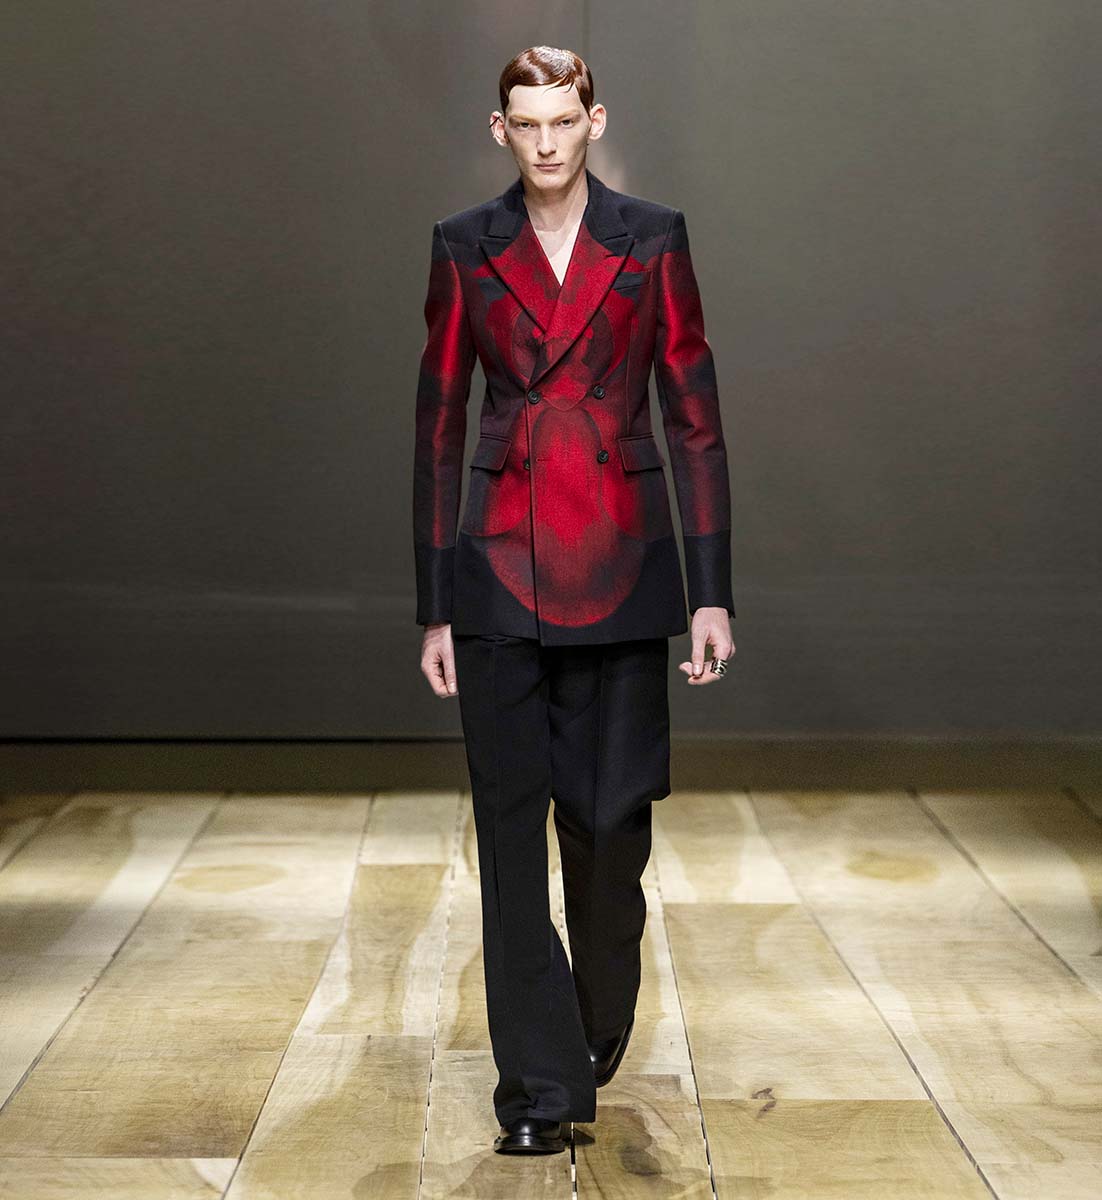 Alexander McQueen's Autumn and Winter 2023 collection